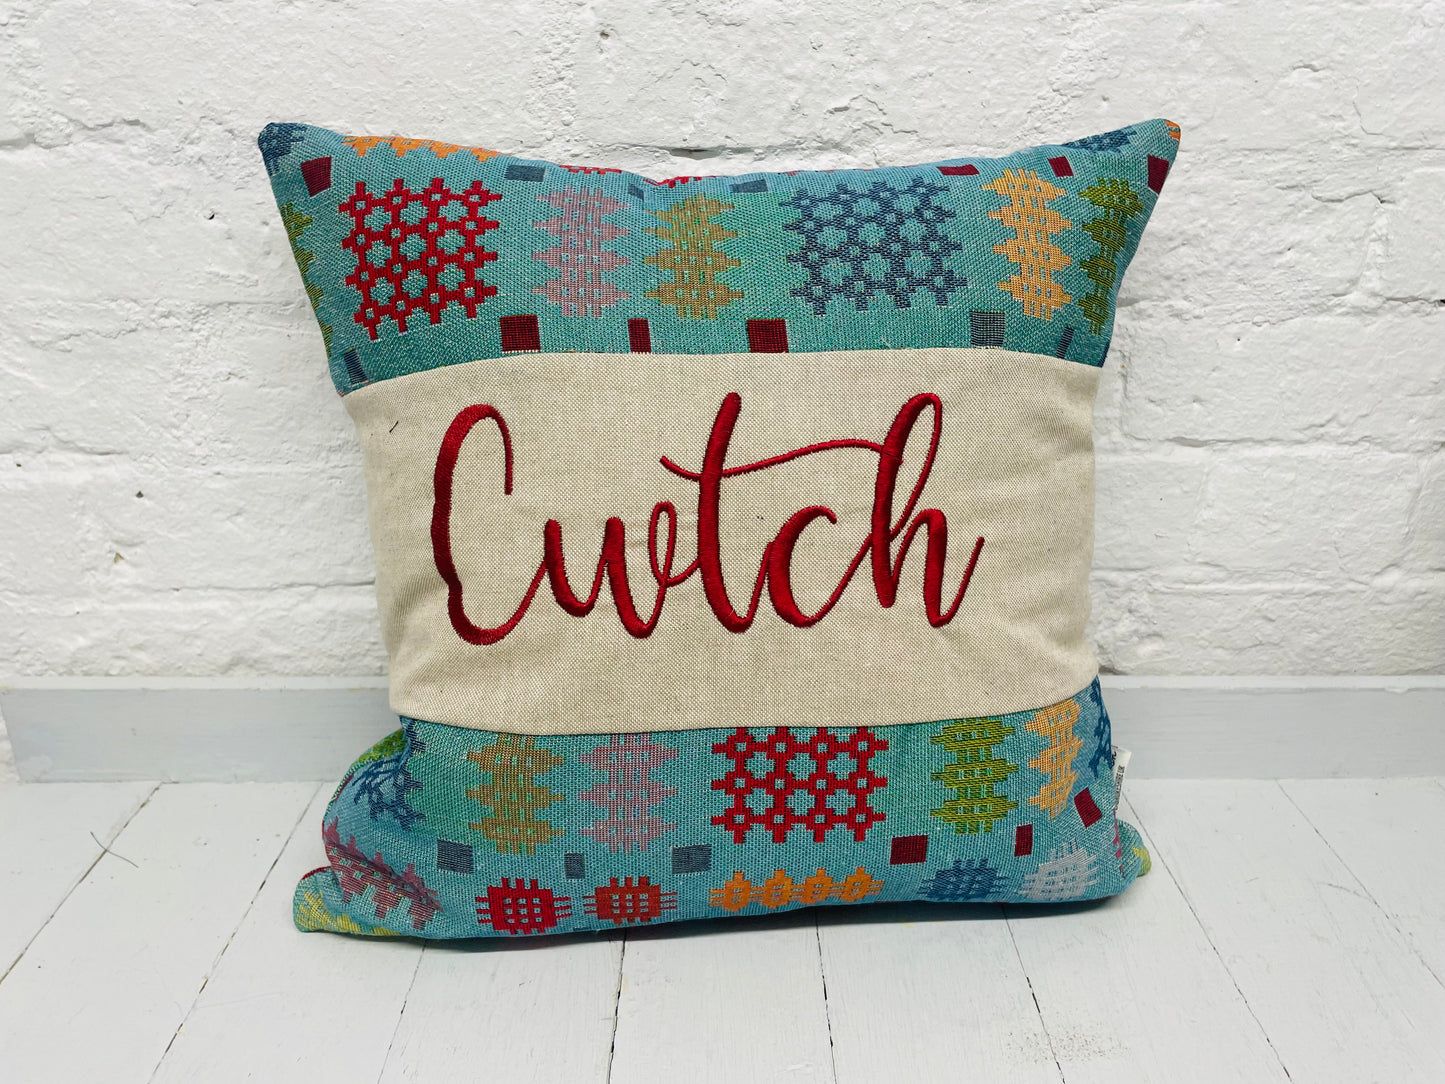 Cwtch Welsh Blanket style  Cushion- Square Cwtch Panel Cushion